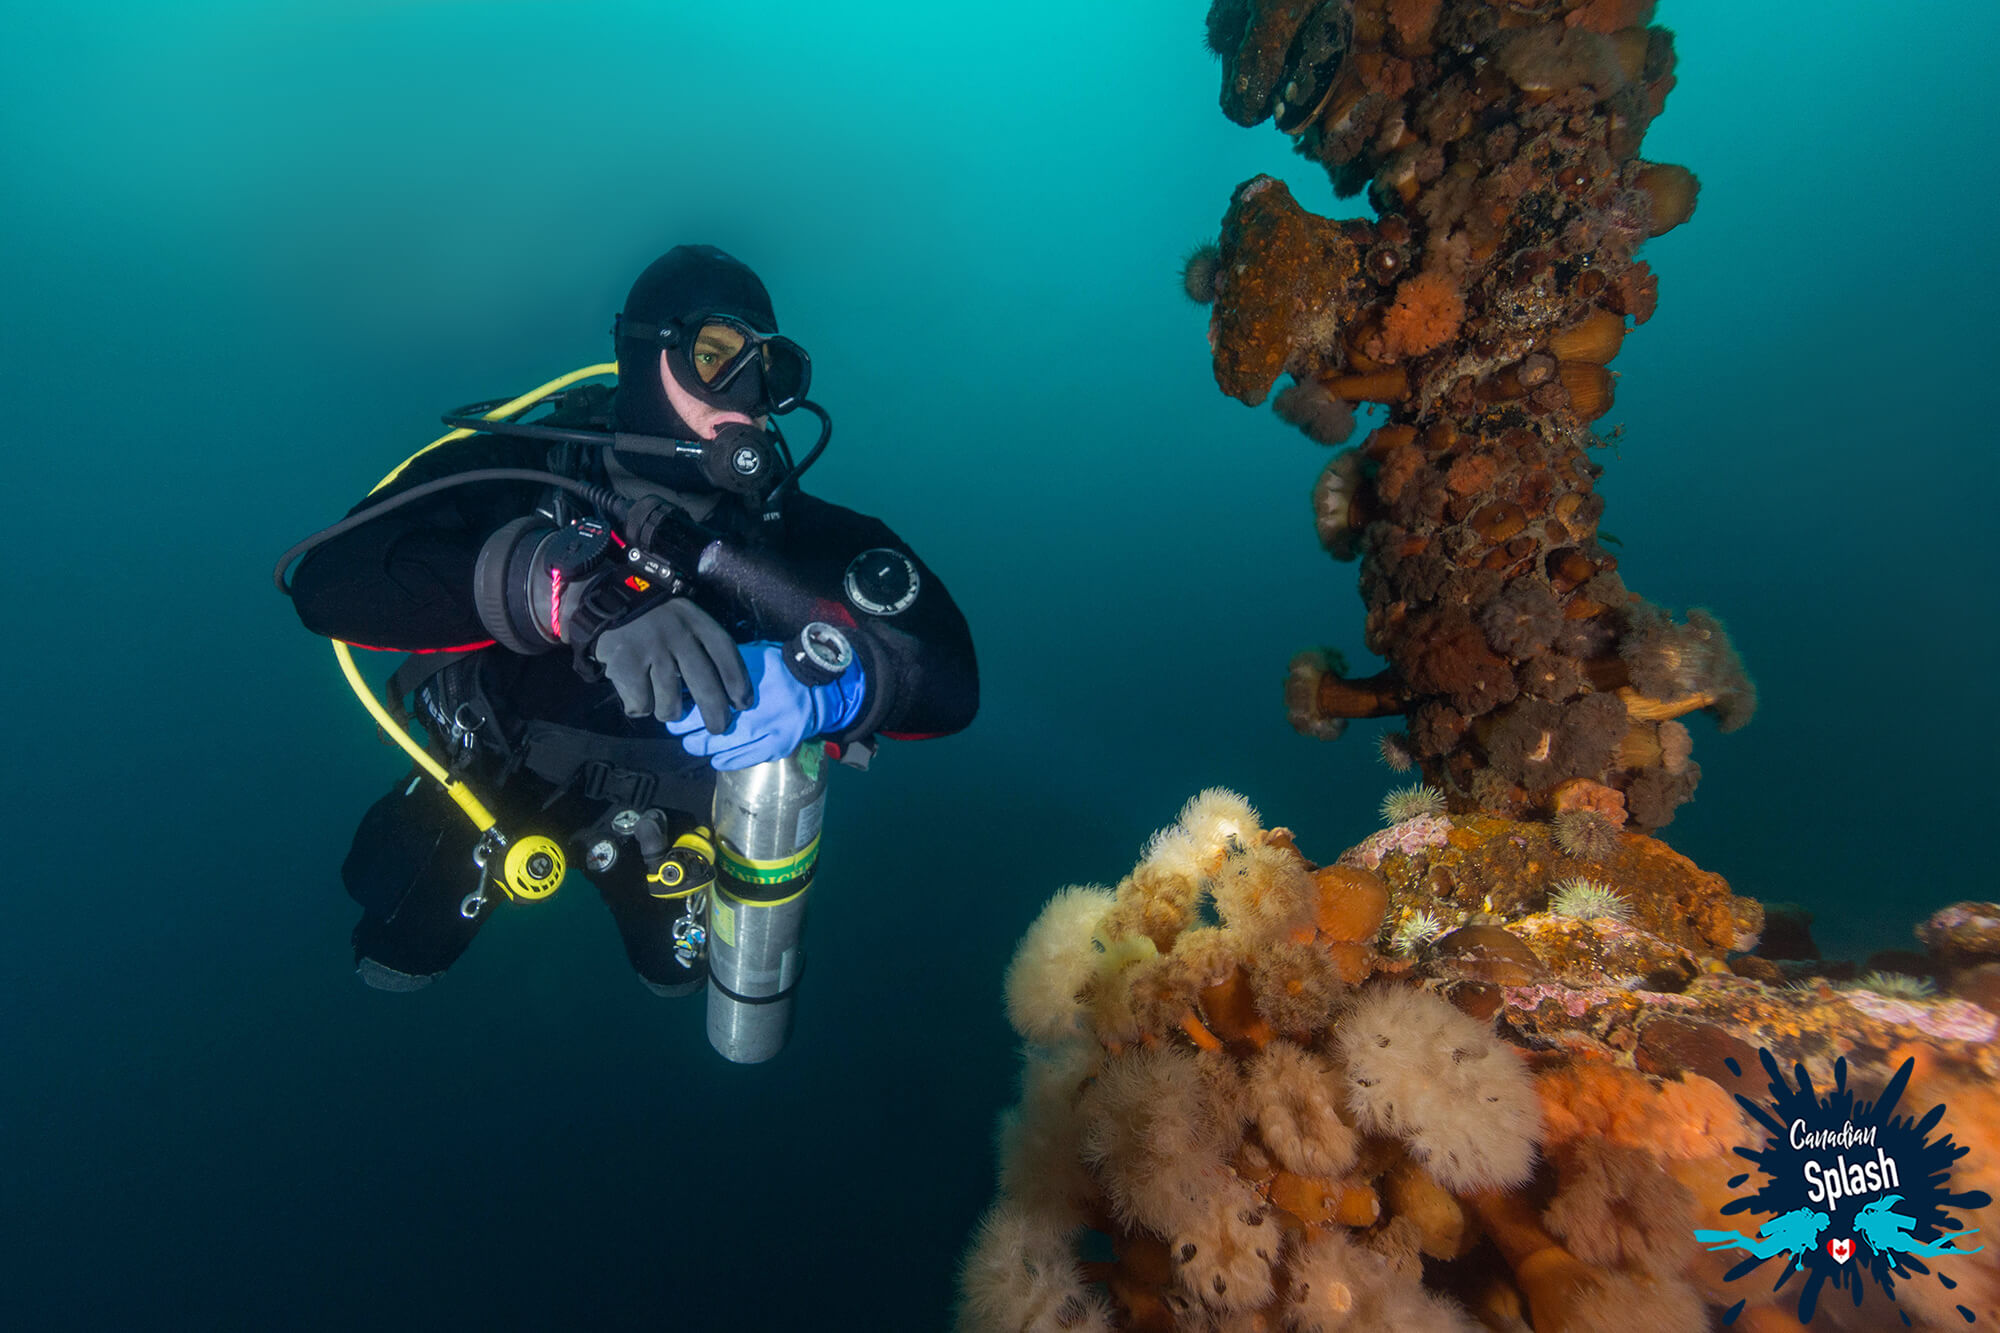 Joey Scuba Diving The Shipwrecks Of Newfoundland And Looking At Anemones, Bell Island, Canada